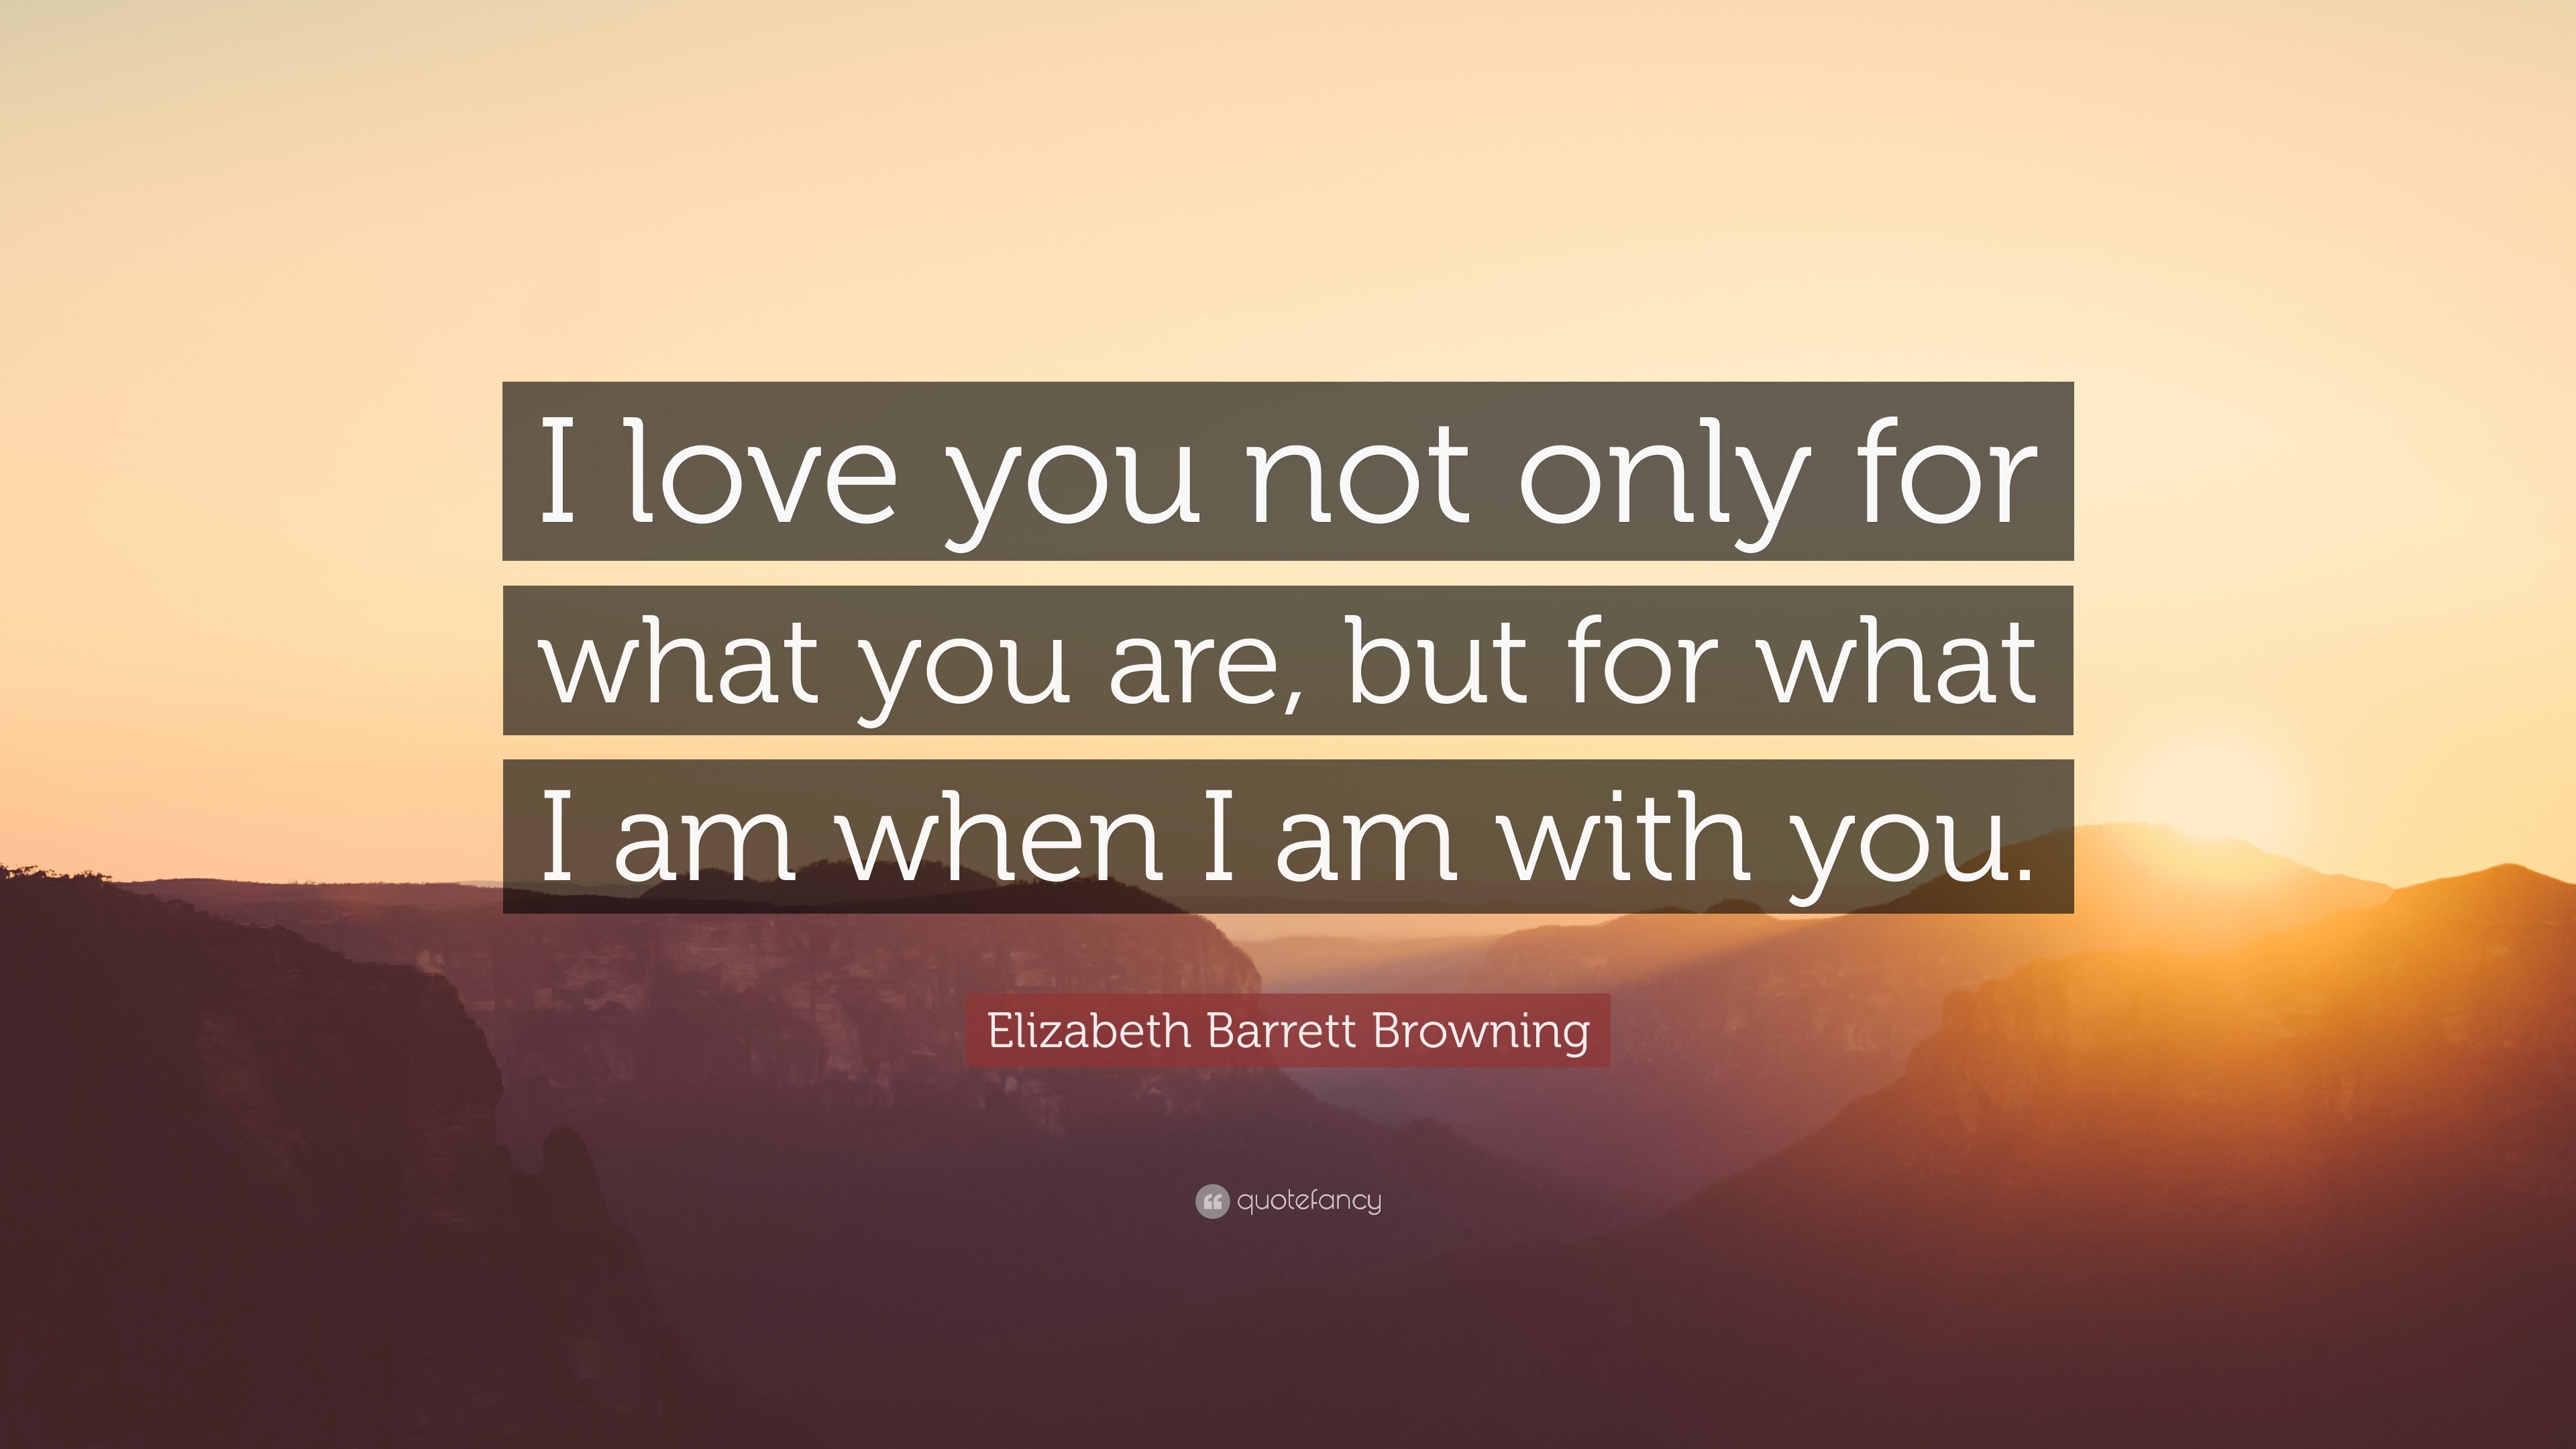 Elizabeth Barrett Browning Quote: “I love you not only for what you are ...